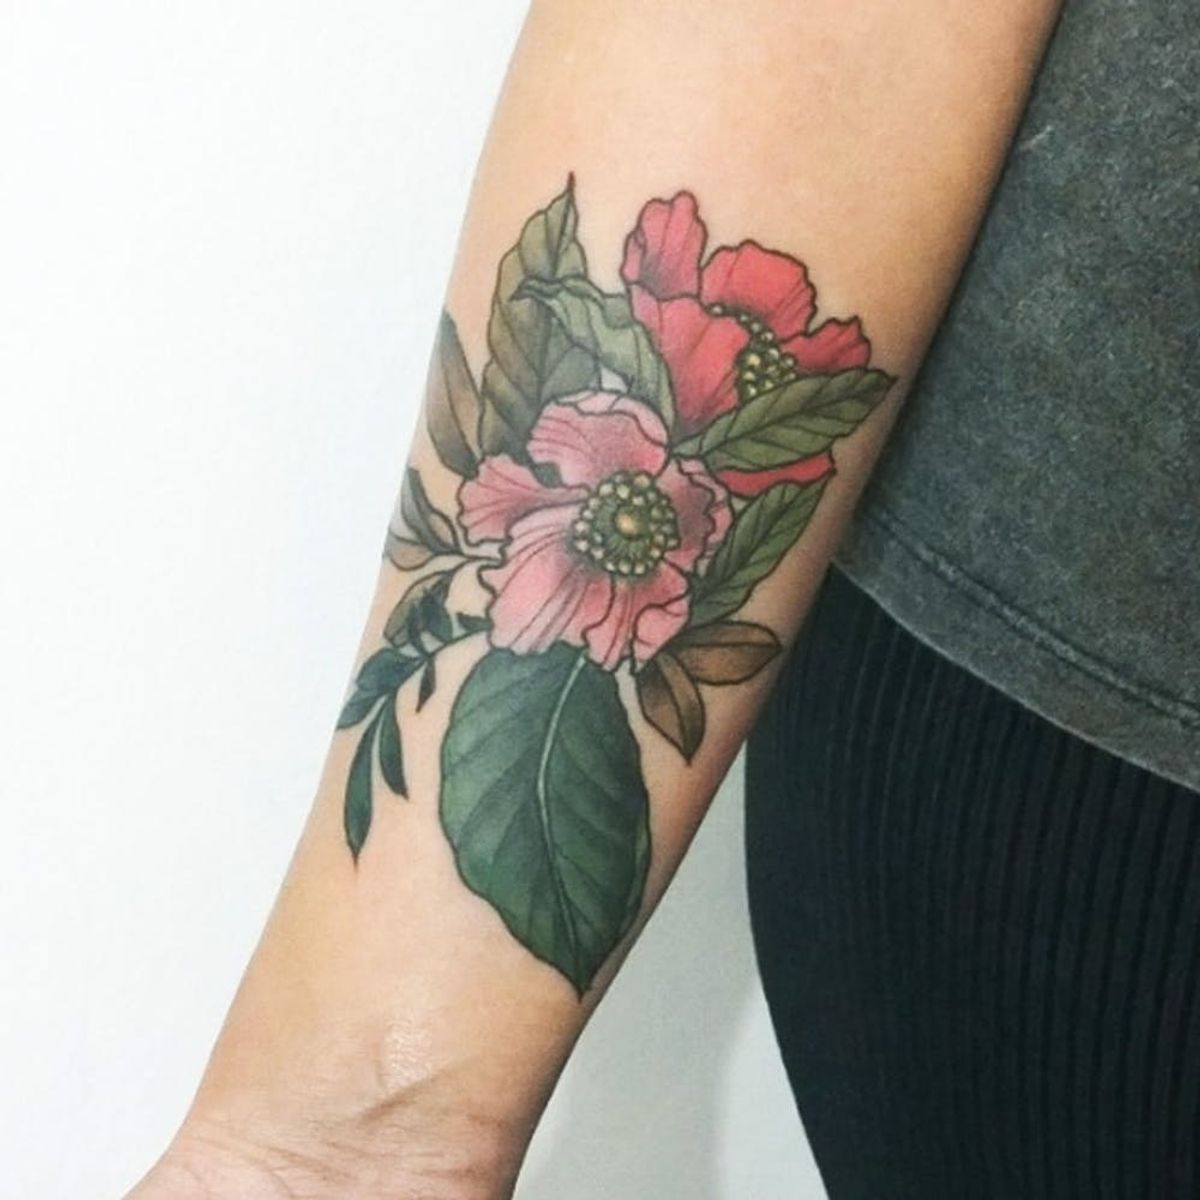 11 Flower Tattoos to Rock on Your Arm